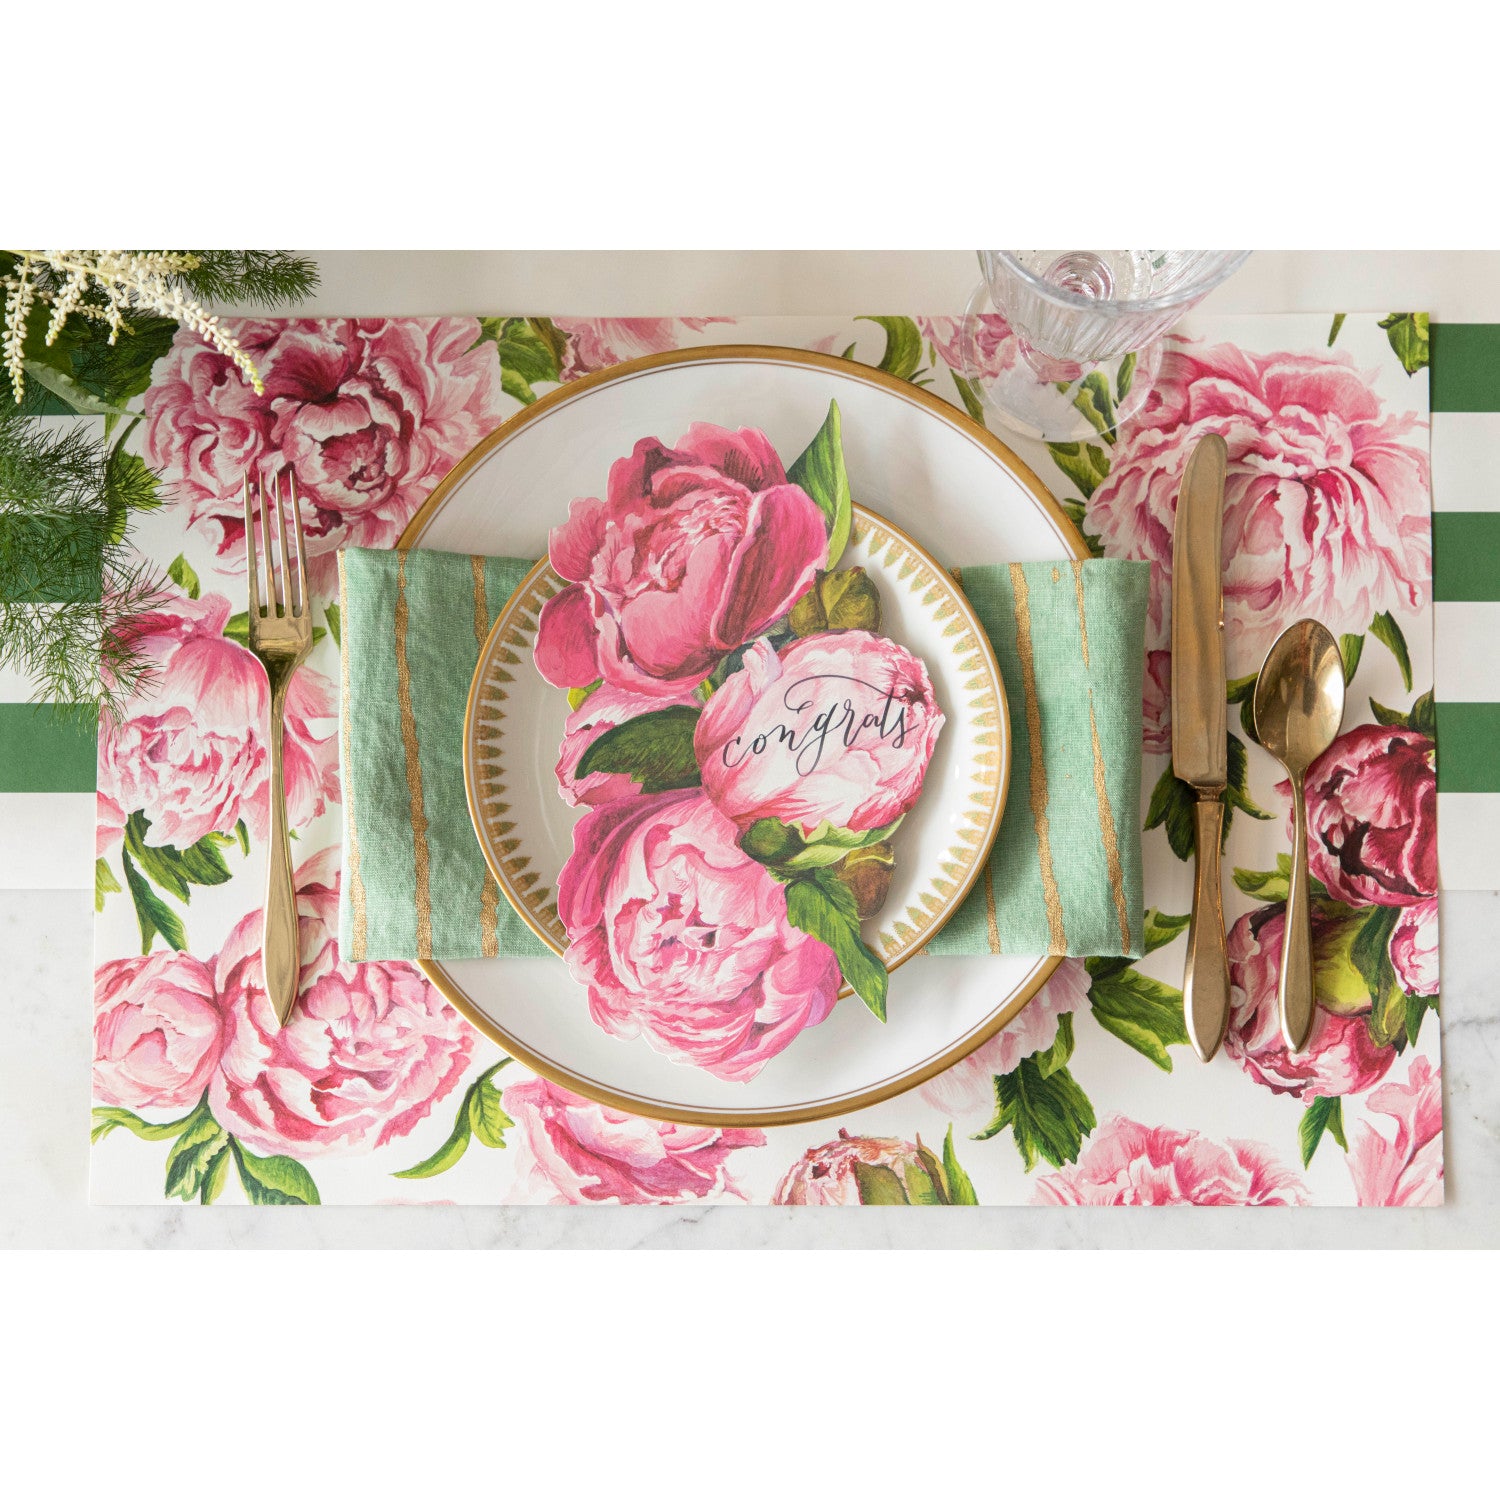 An elegant touch to your tablescape, featuring a Peonies In Bloom Placemat from Hester &amp; Cook adorned with flowers on paper placemats.